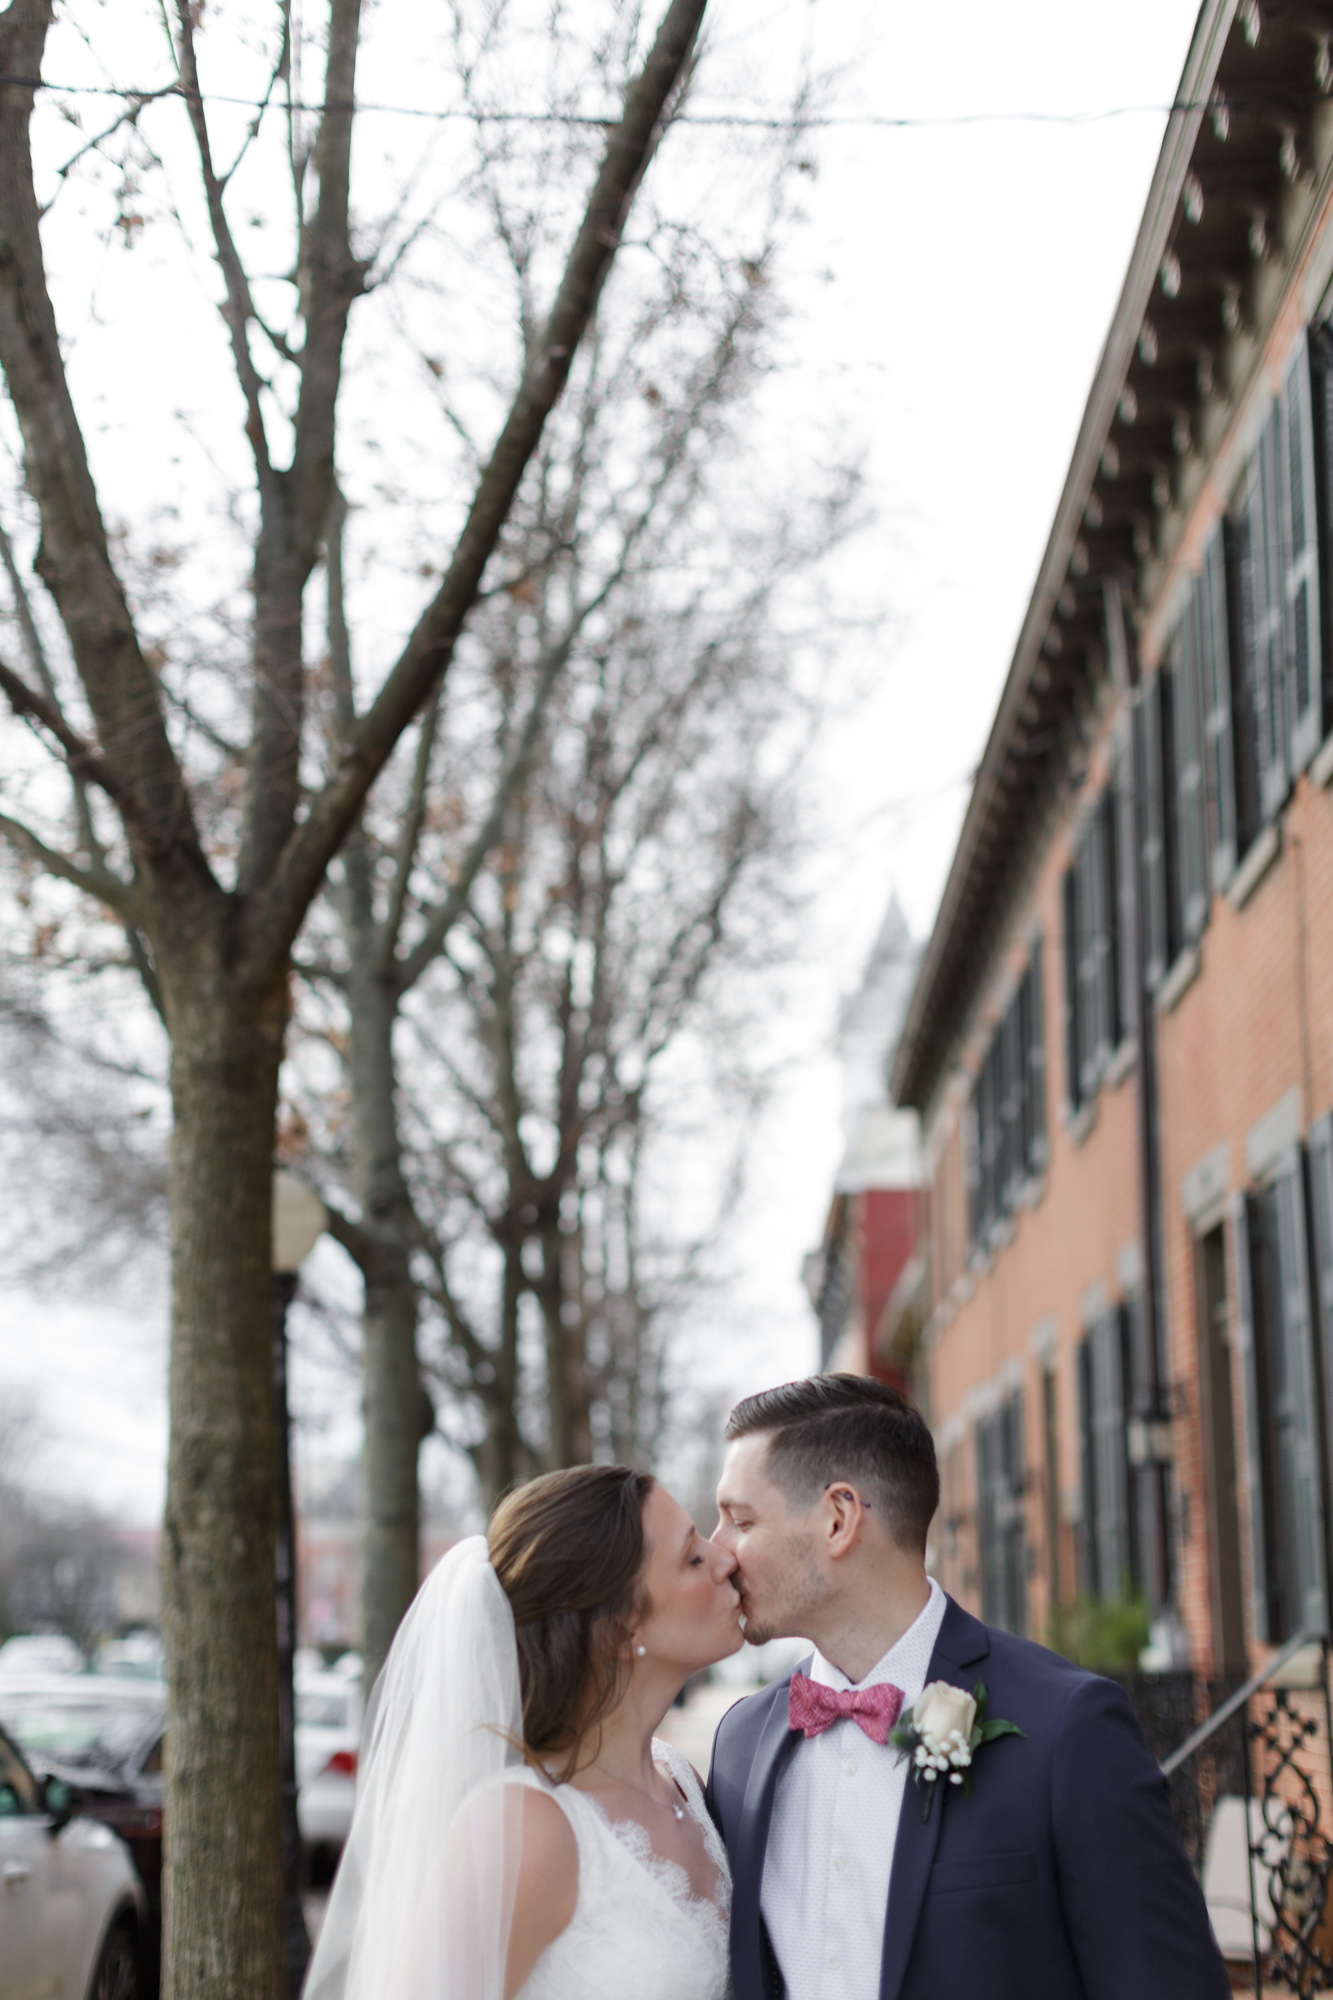 Elegant bride and groom kiss after their wedding ceremony in Bordentown, NJ